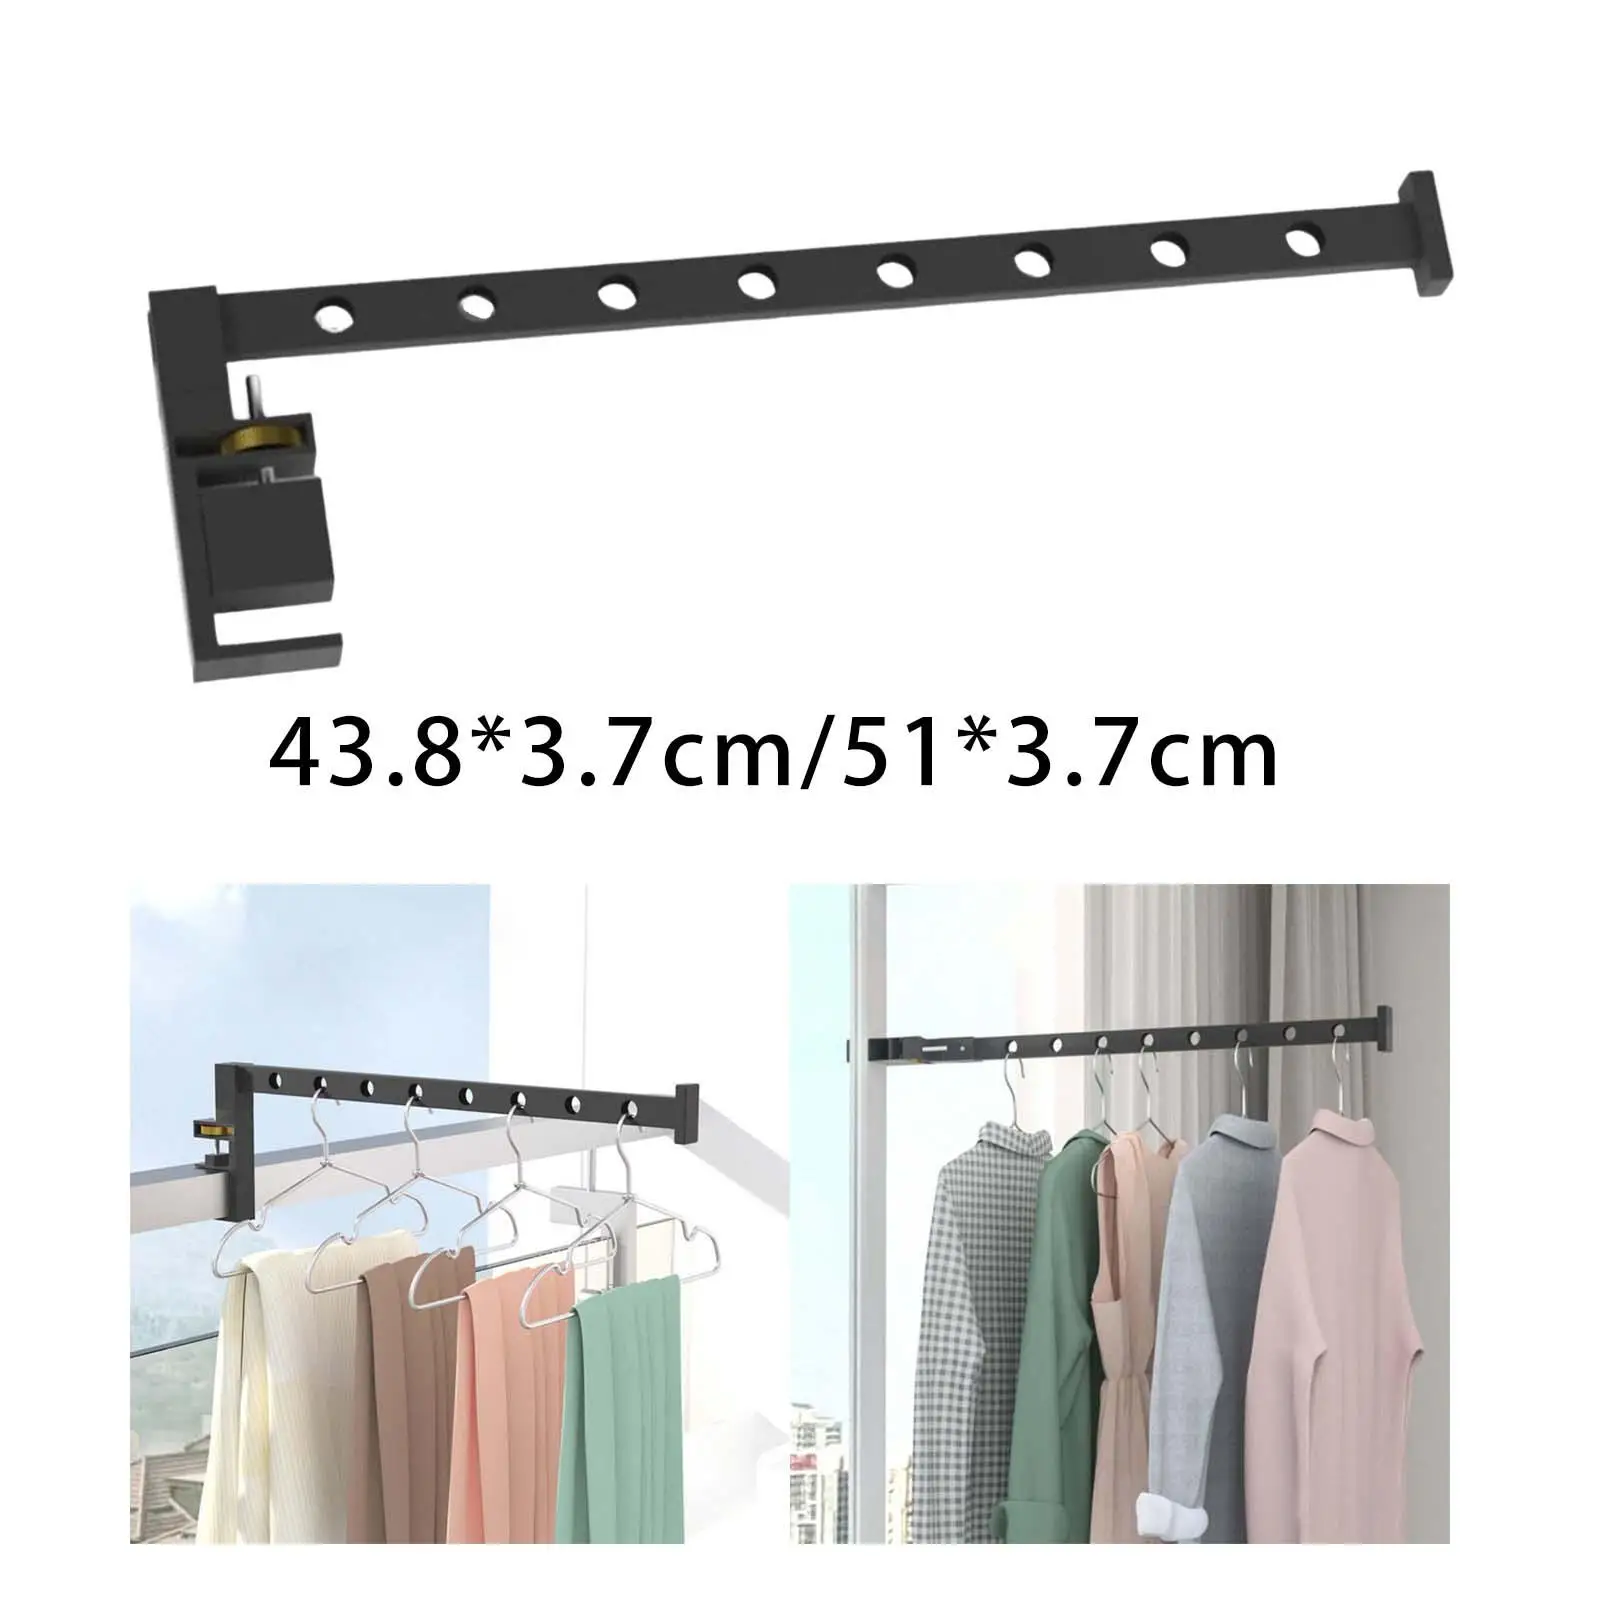 Drying Clothes Folding Clothes Hanger Collapsible Sturdy Durable Retractable Hook Wall Mounted Clothes Hanger for Window Jeans